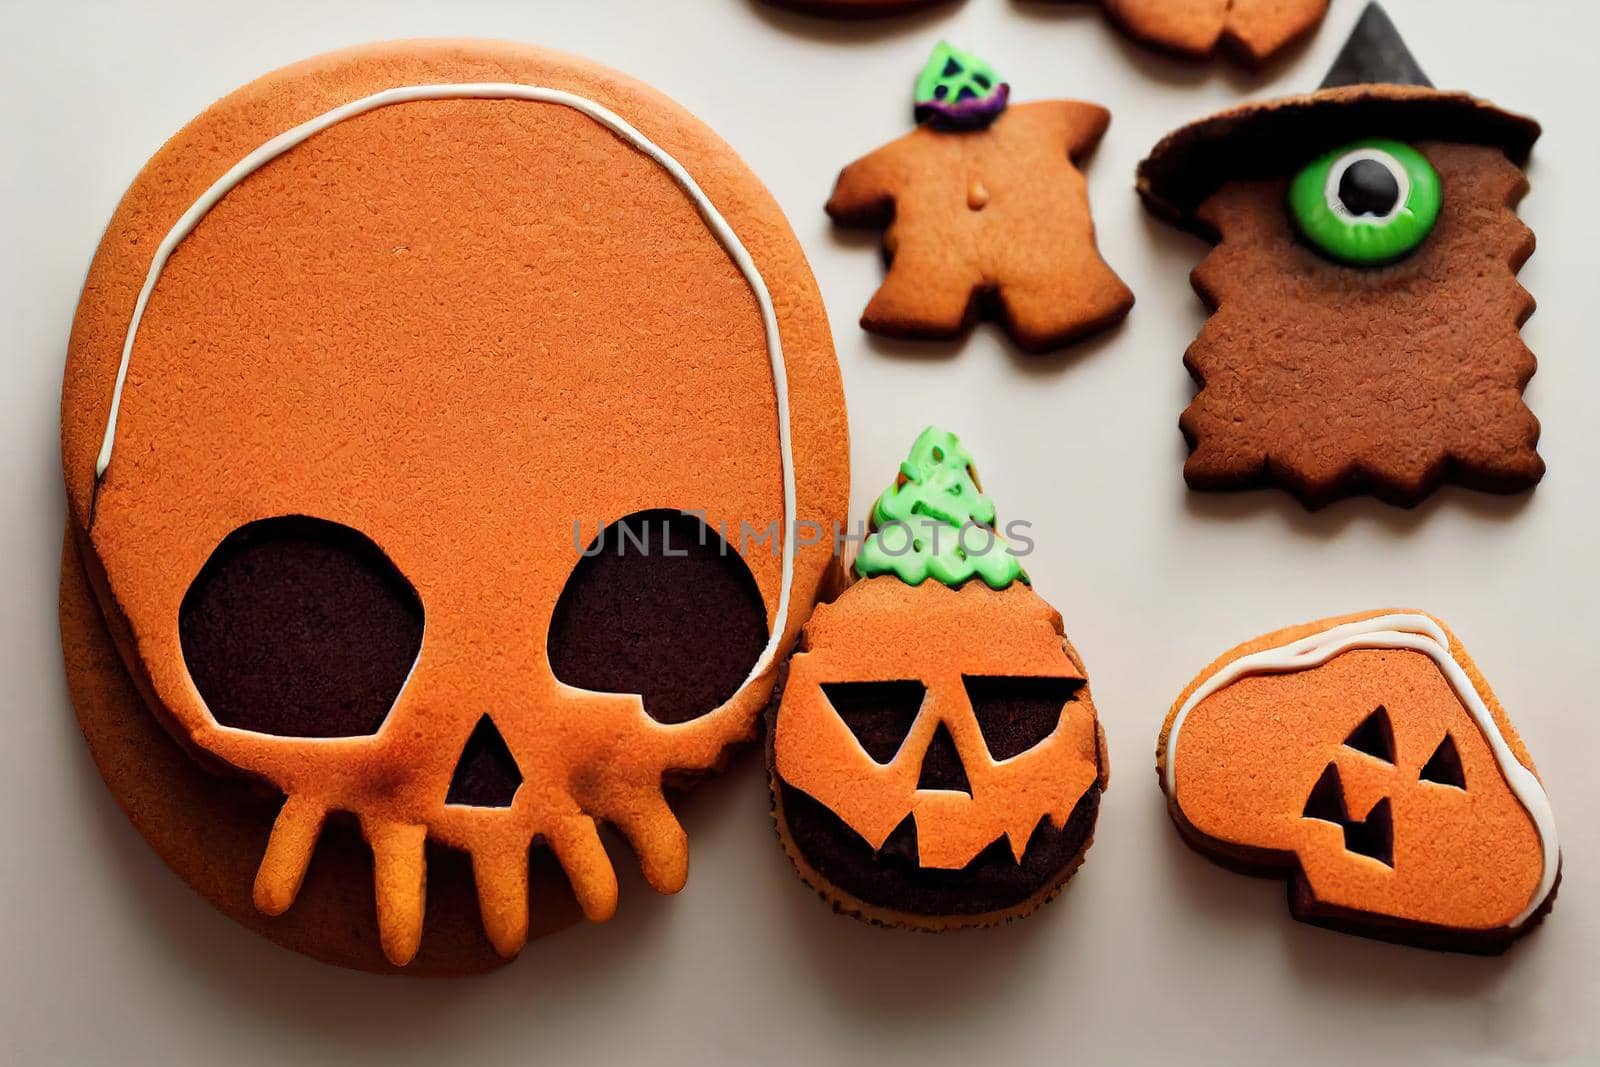 Cartoon Halloween gingerbread cookies, witch fingers and holiday sweets, Halloween trick or treat party dessert food, pumpkin biscuits in shape of skull, skeleton, bone, monster eyeball, zombie